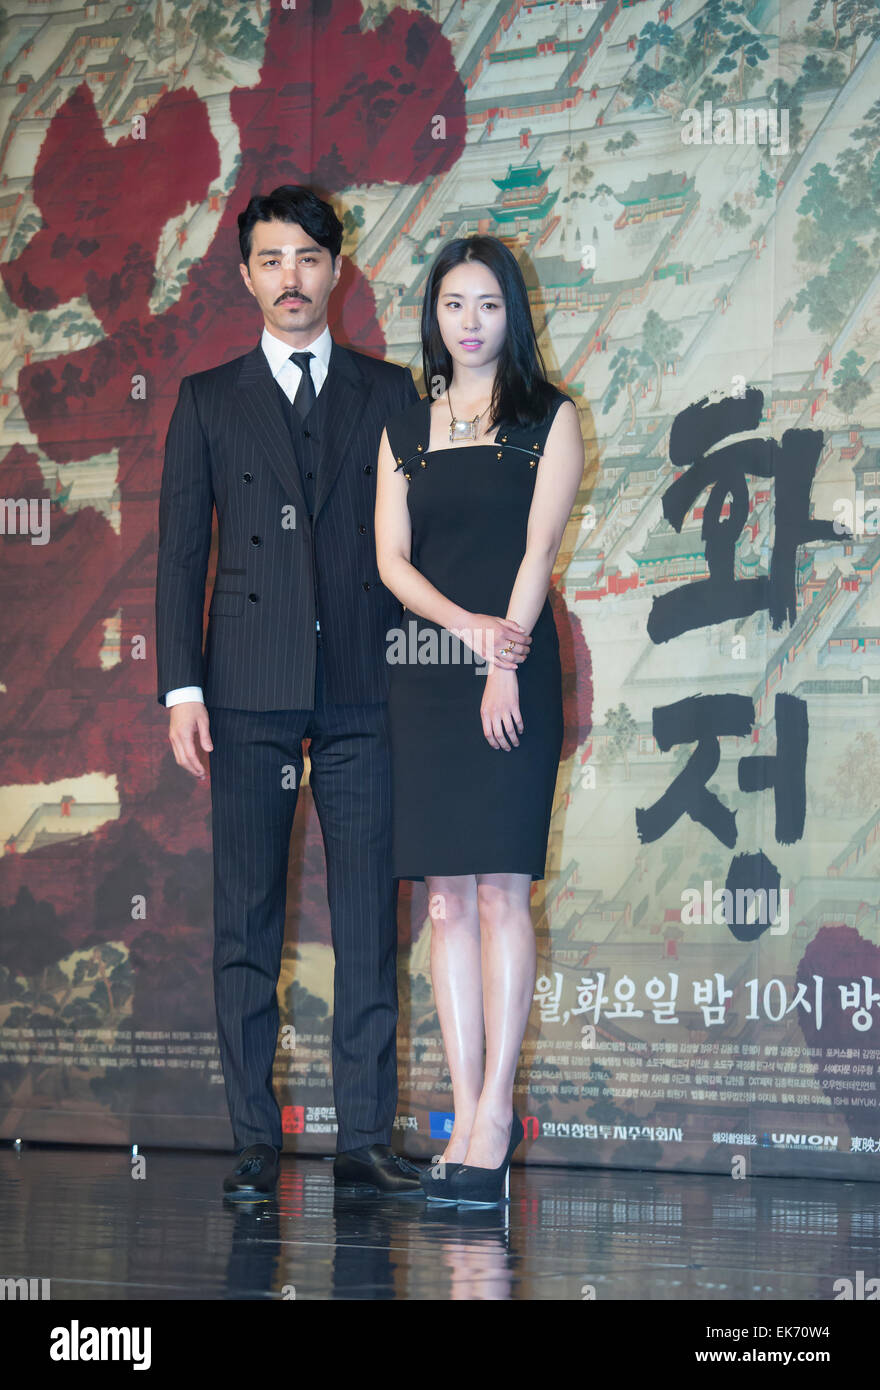 Cha Seung-Won and Lee Yeon-Hee, Apr 07, 2015 : South Korean actor Cha Seung-won (L) and actress Lee Yeon-hee attend a press conference of MBC's new drama, Splendid Politics, in Seoul, South Korea. © Lee Jae-Won/AFLO/Alamy Live News Stock Photo